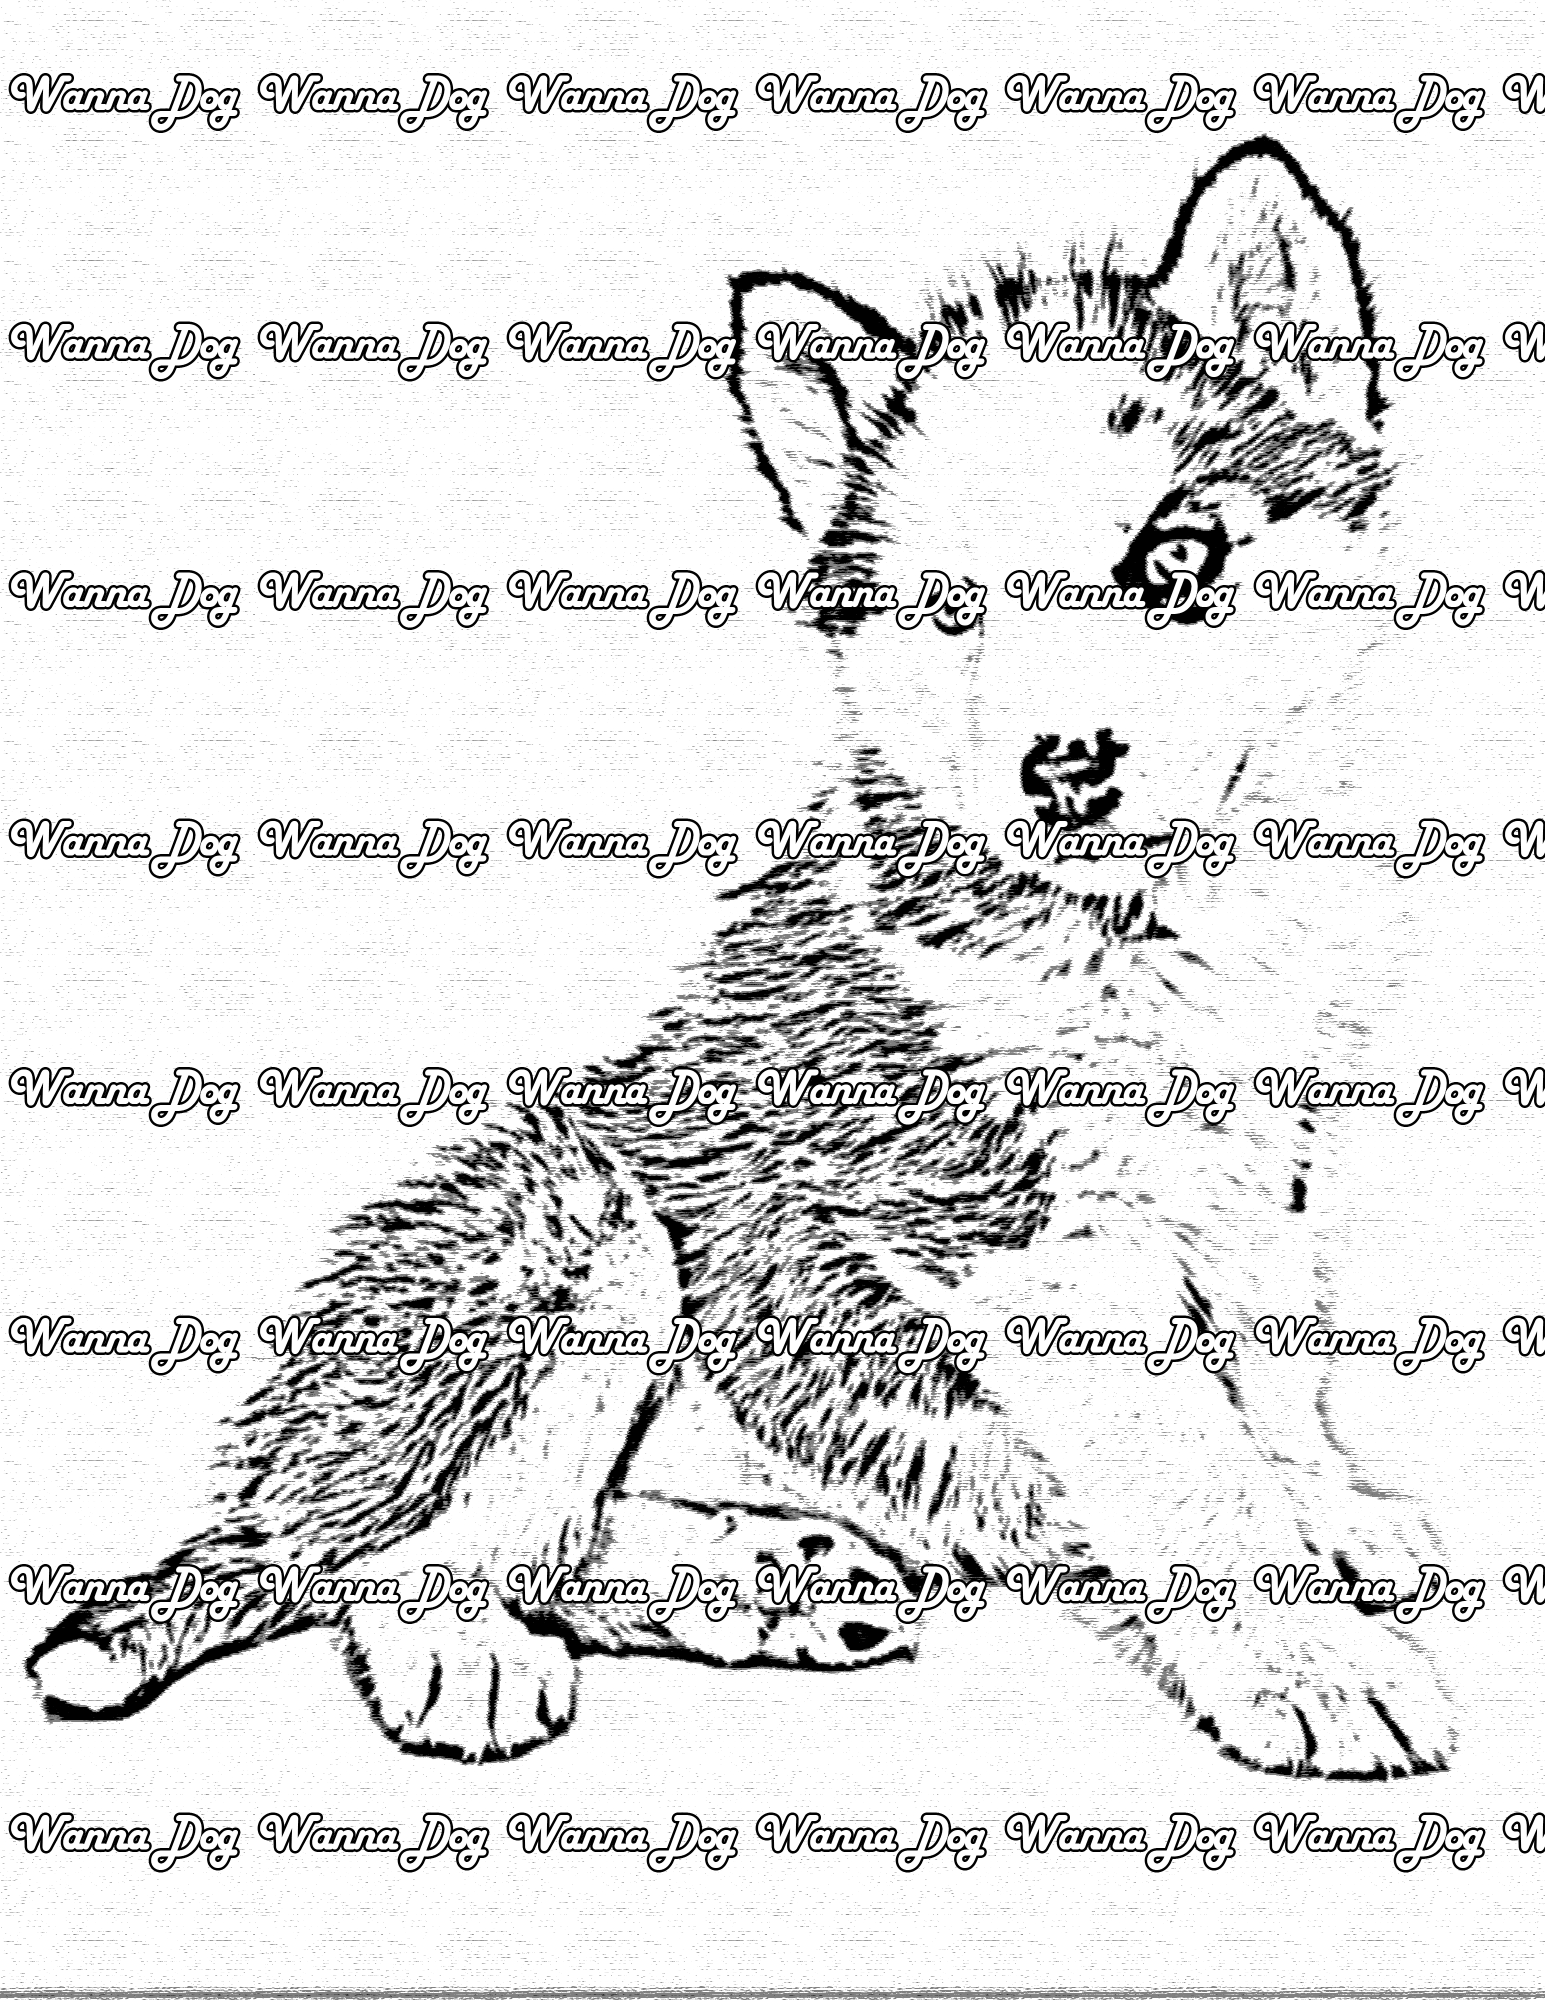 Husky Puppy Coloring Page of a Husky Puppy sitting and posing